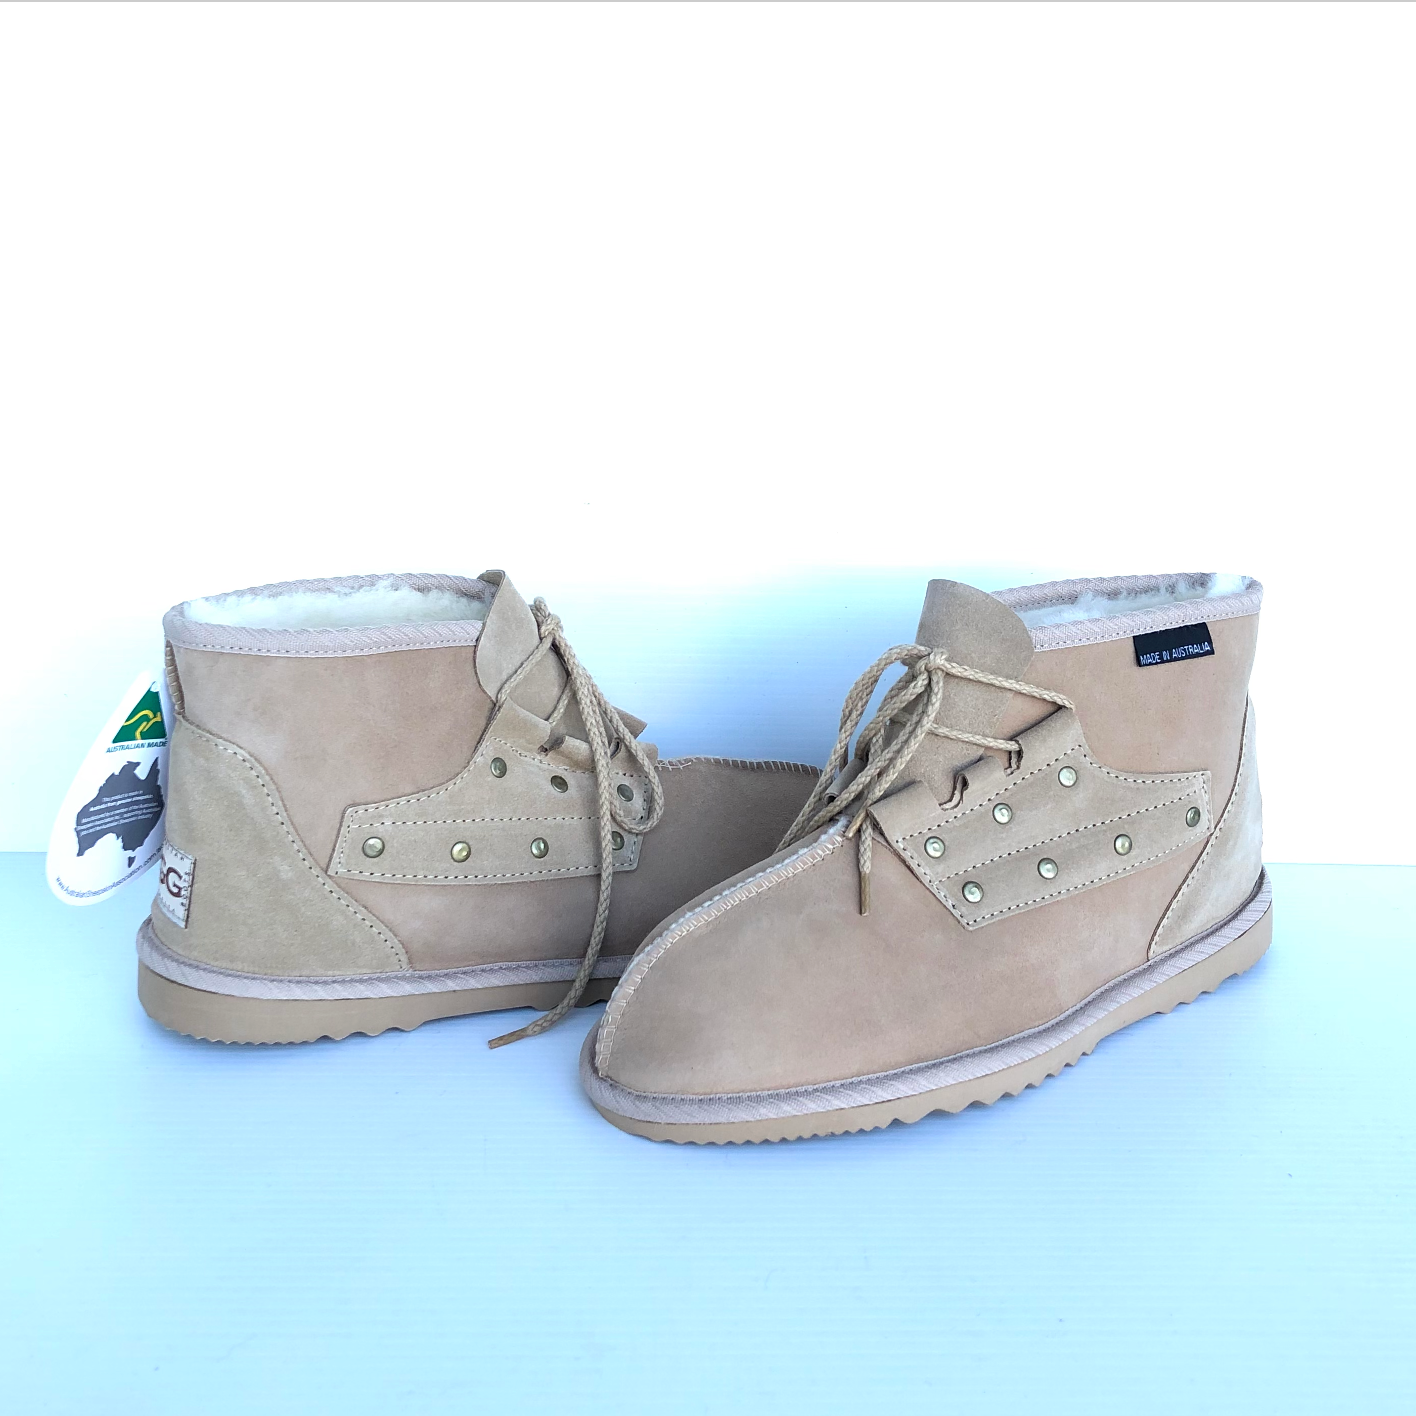 Pair of sand coloured chestnut desert boots with laces